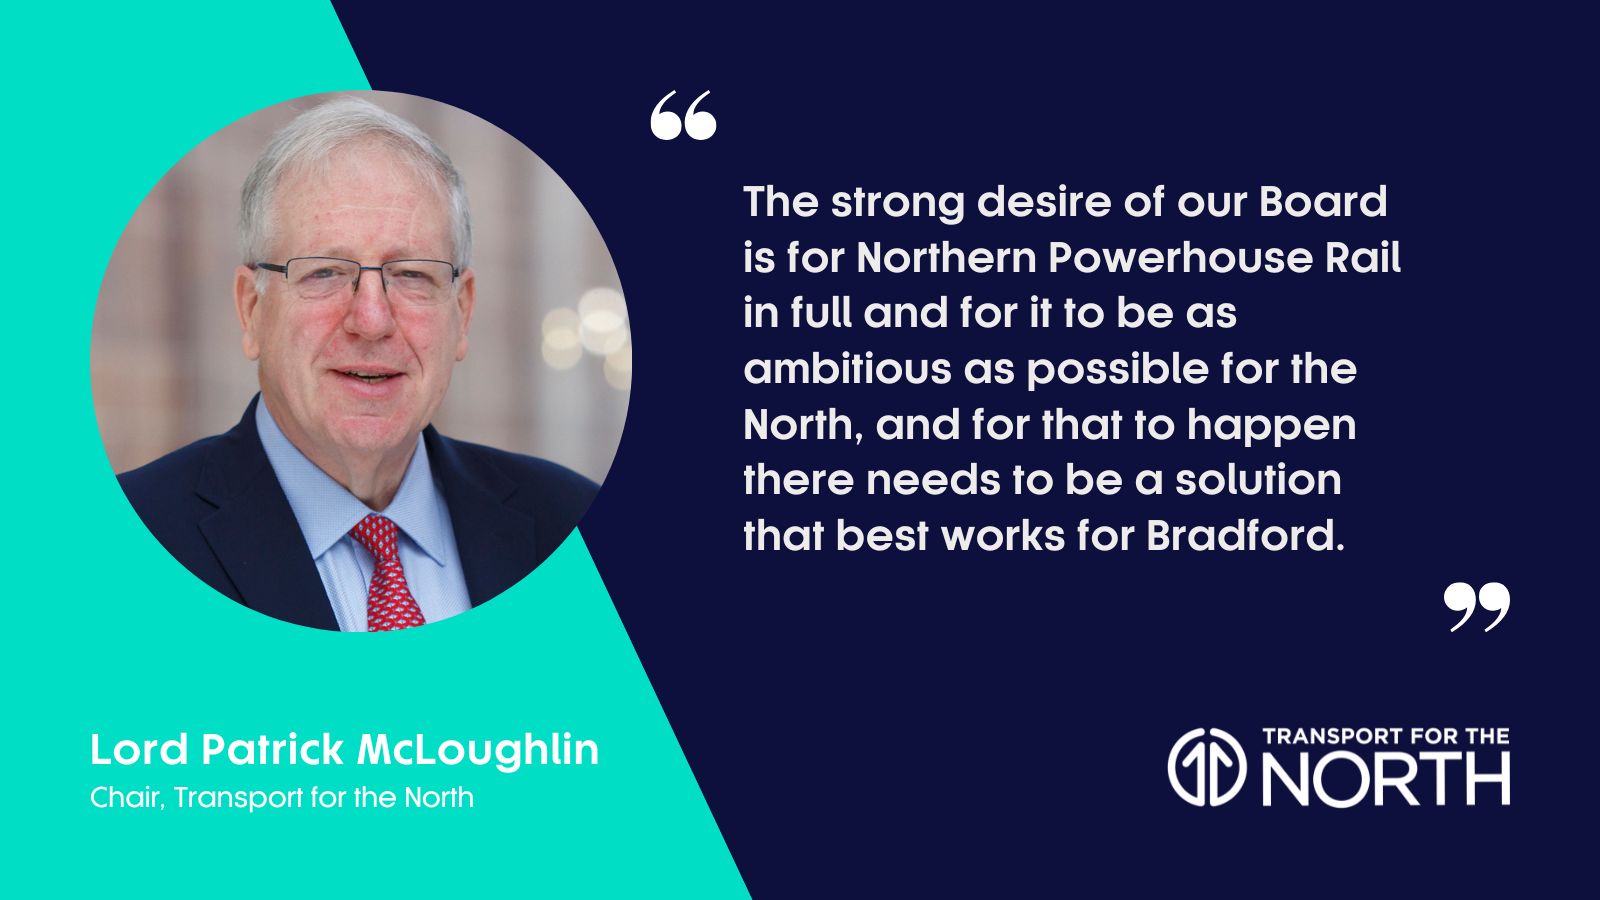 Lord McLoughlin says Northern Powerhouse Rail plans need to include a solution for Bradford